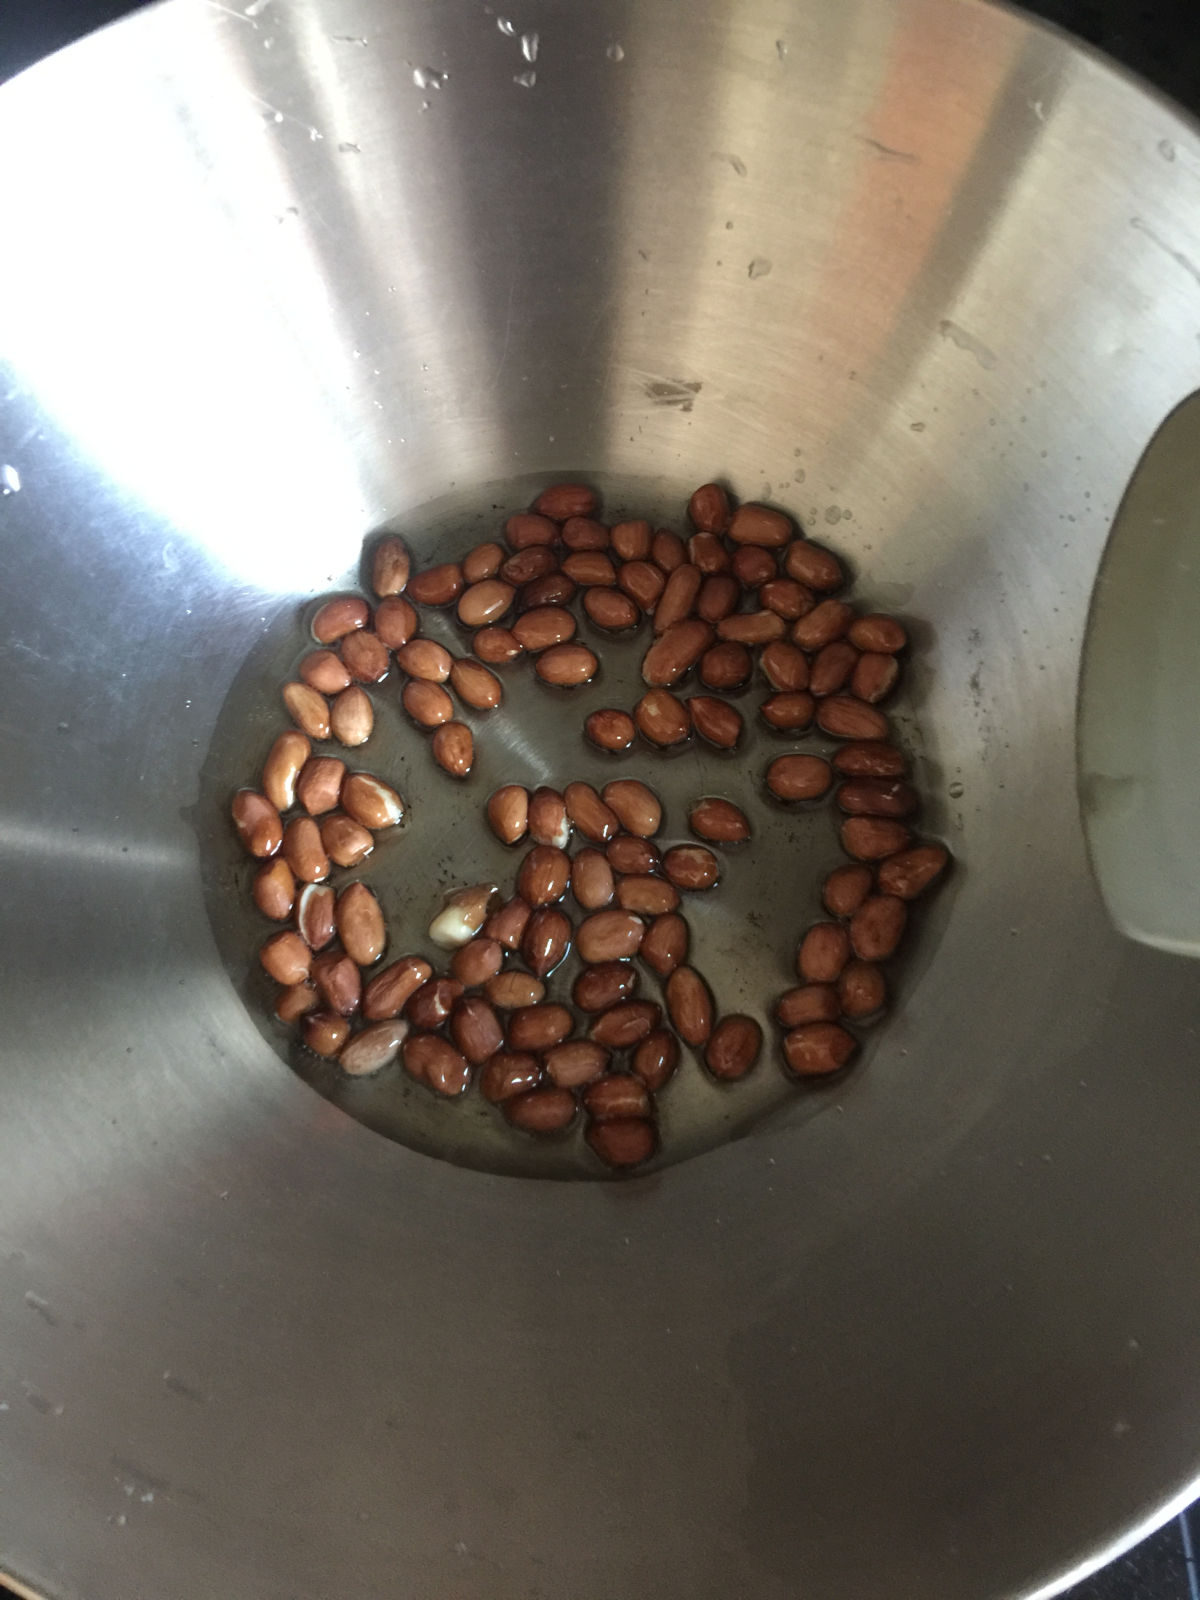 Overhead view of cooking peanuts in the oil in a wok.